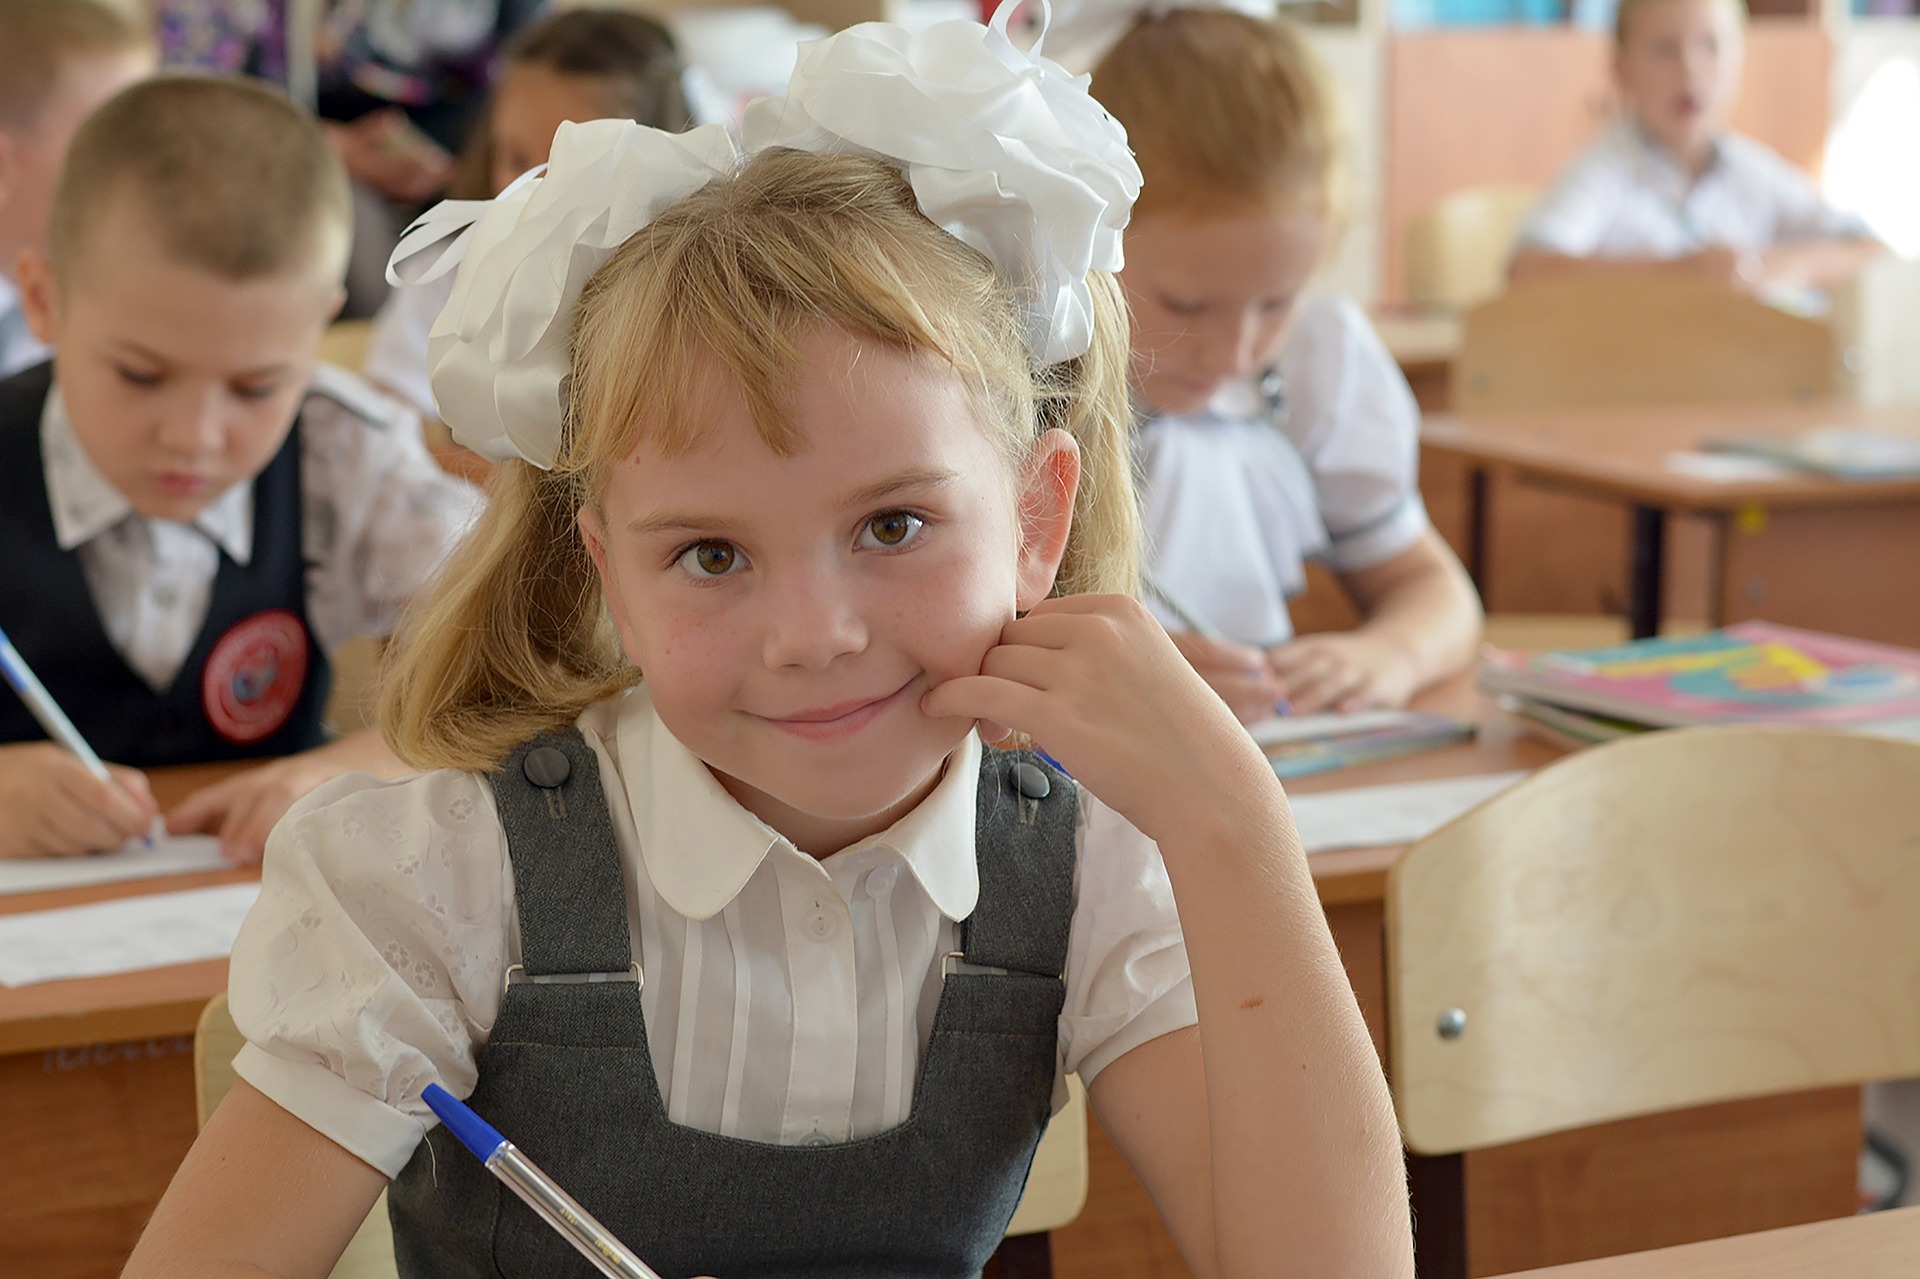 Should Other Countries Adopt Finland's Education System?